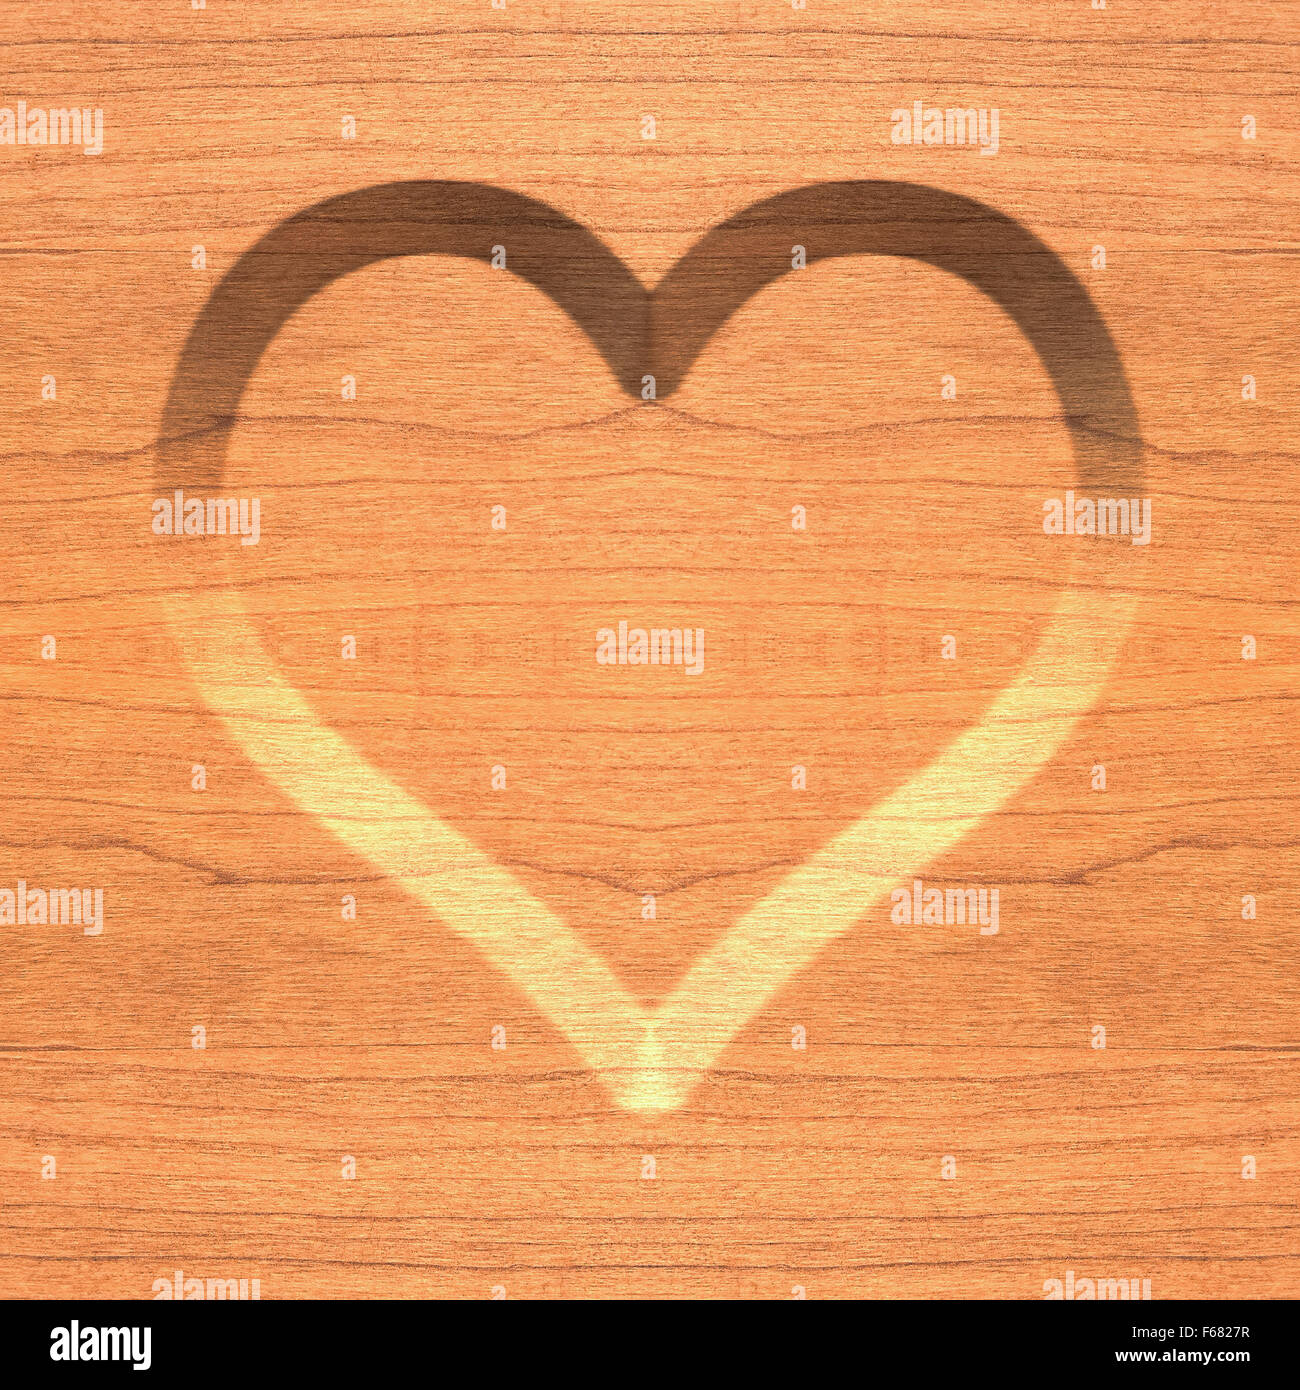 Wooden heart symbol, abstract seamless background. Stock Photo